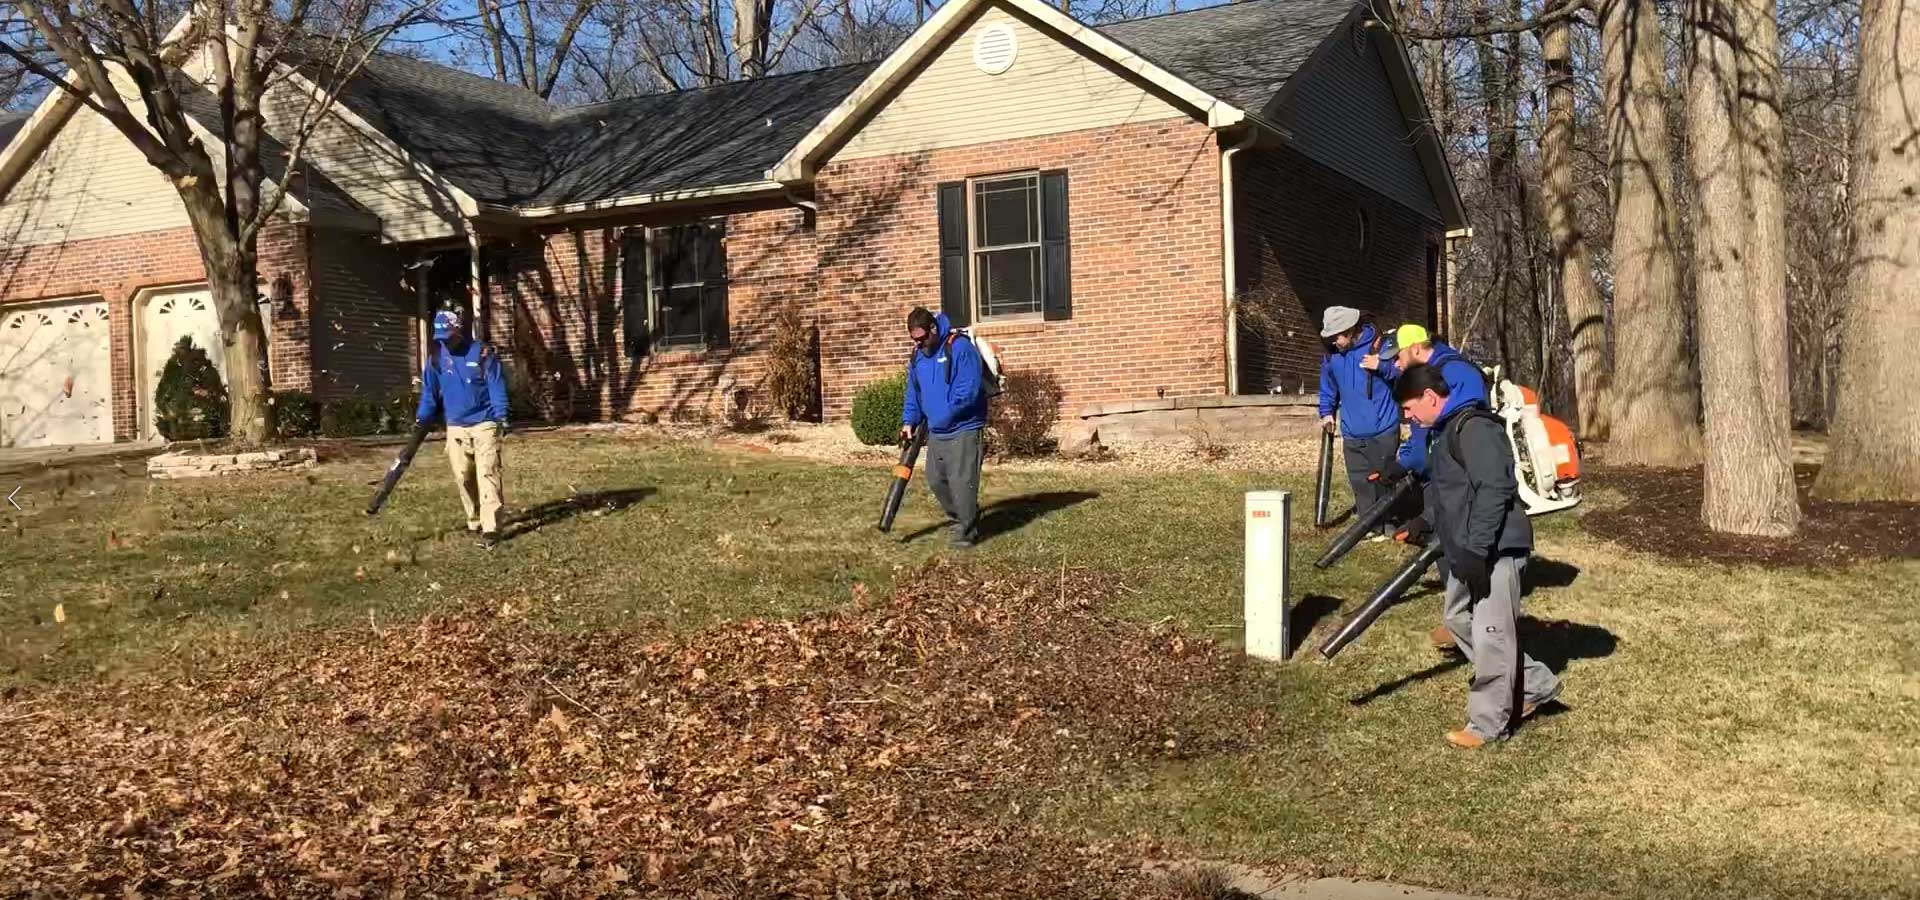 Maintenance workers clearing leaves with leaf blowers in Alton, IL.